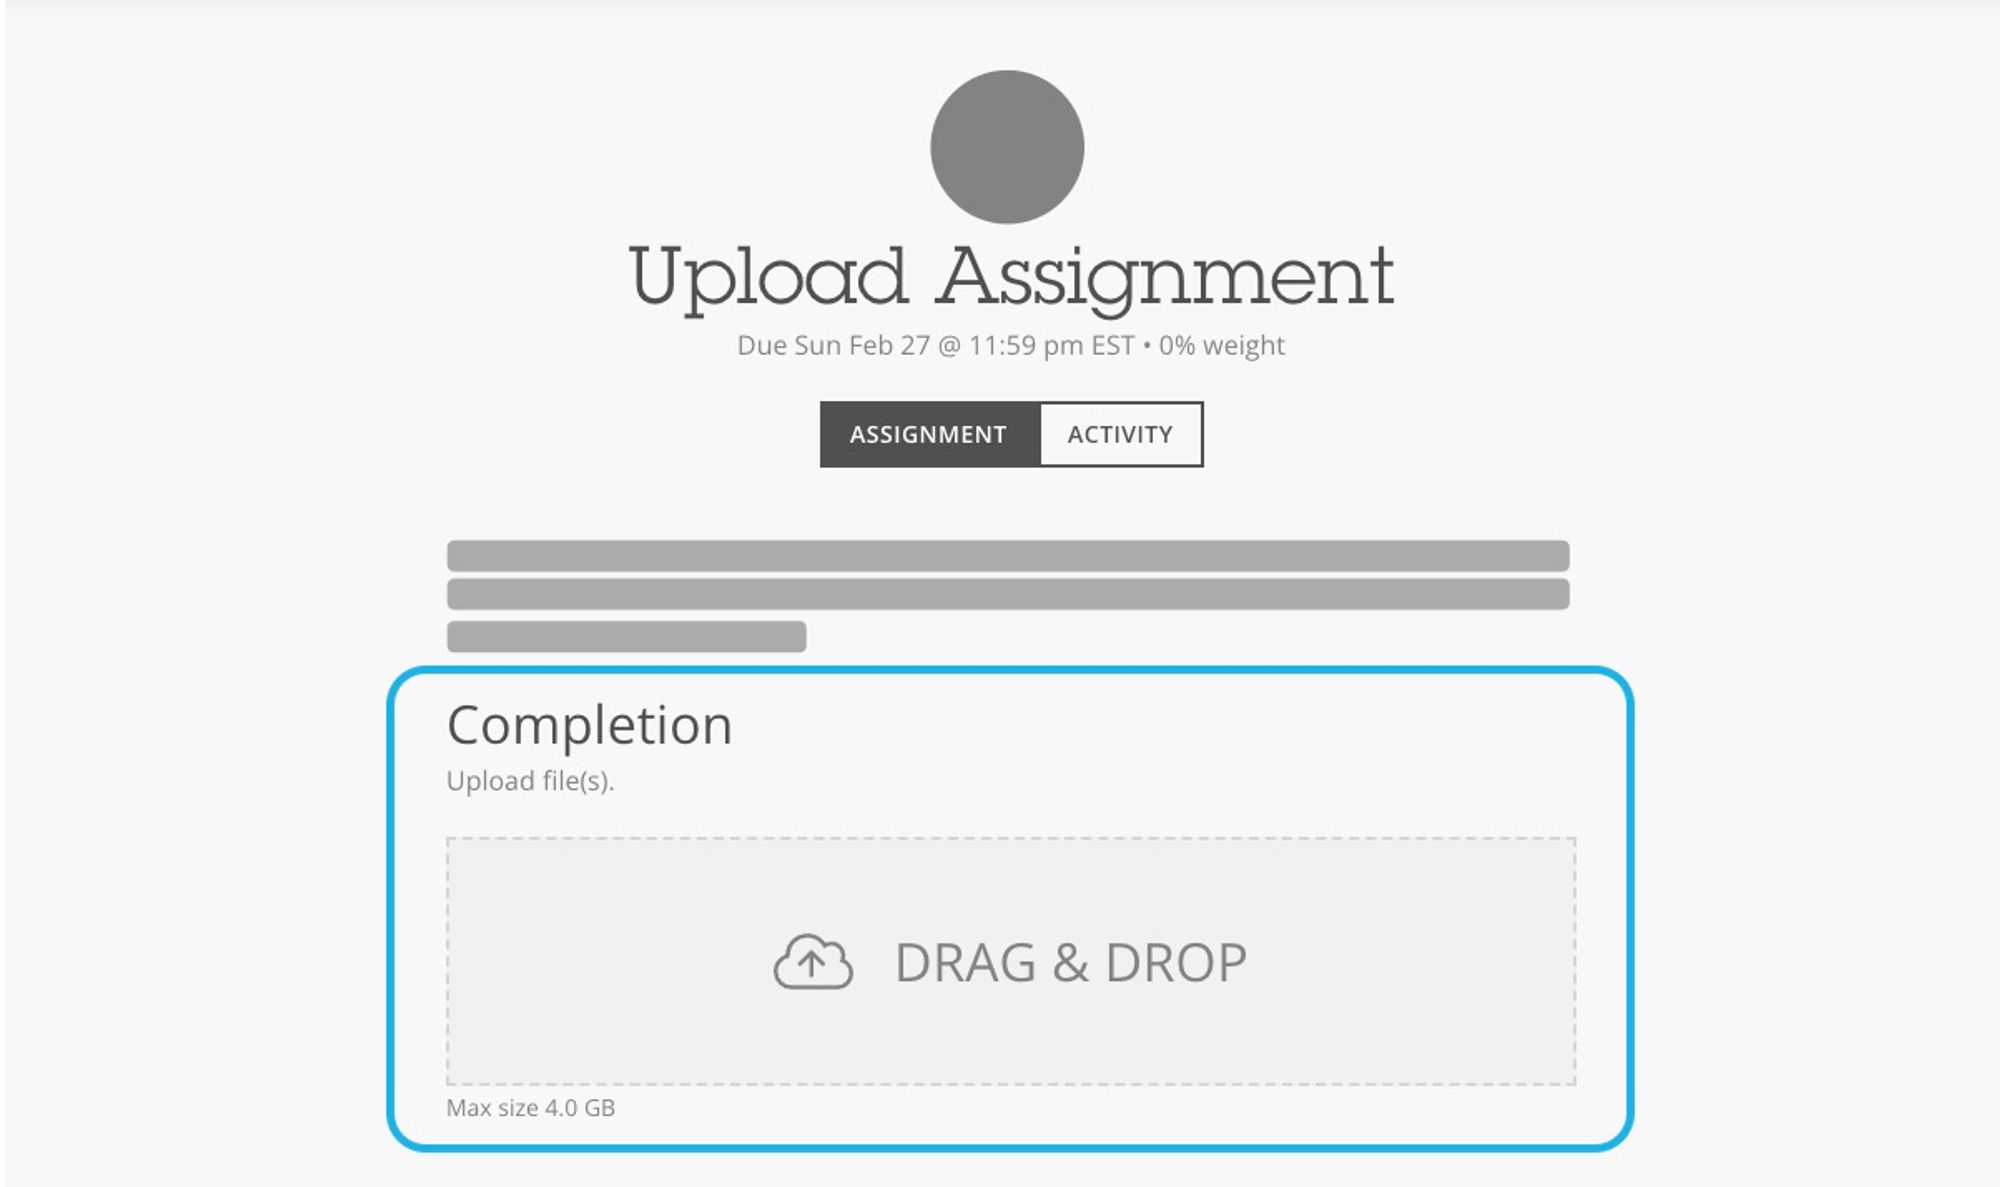 Image of upload assignment